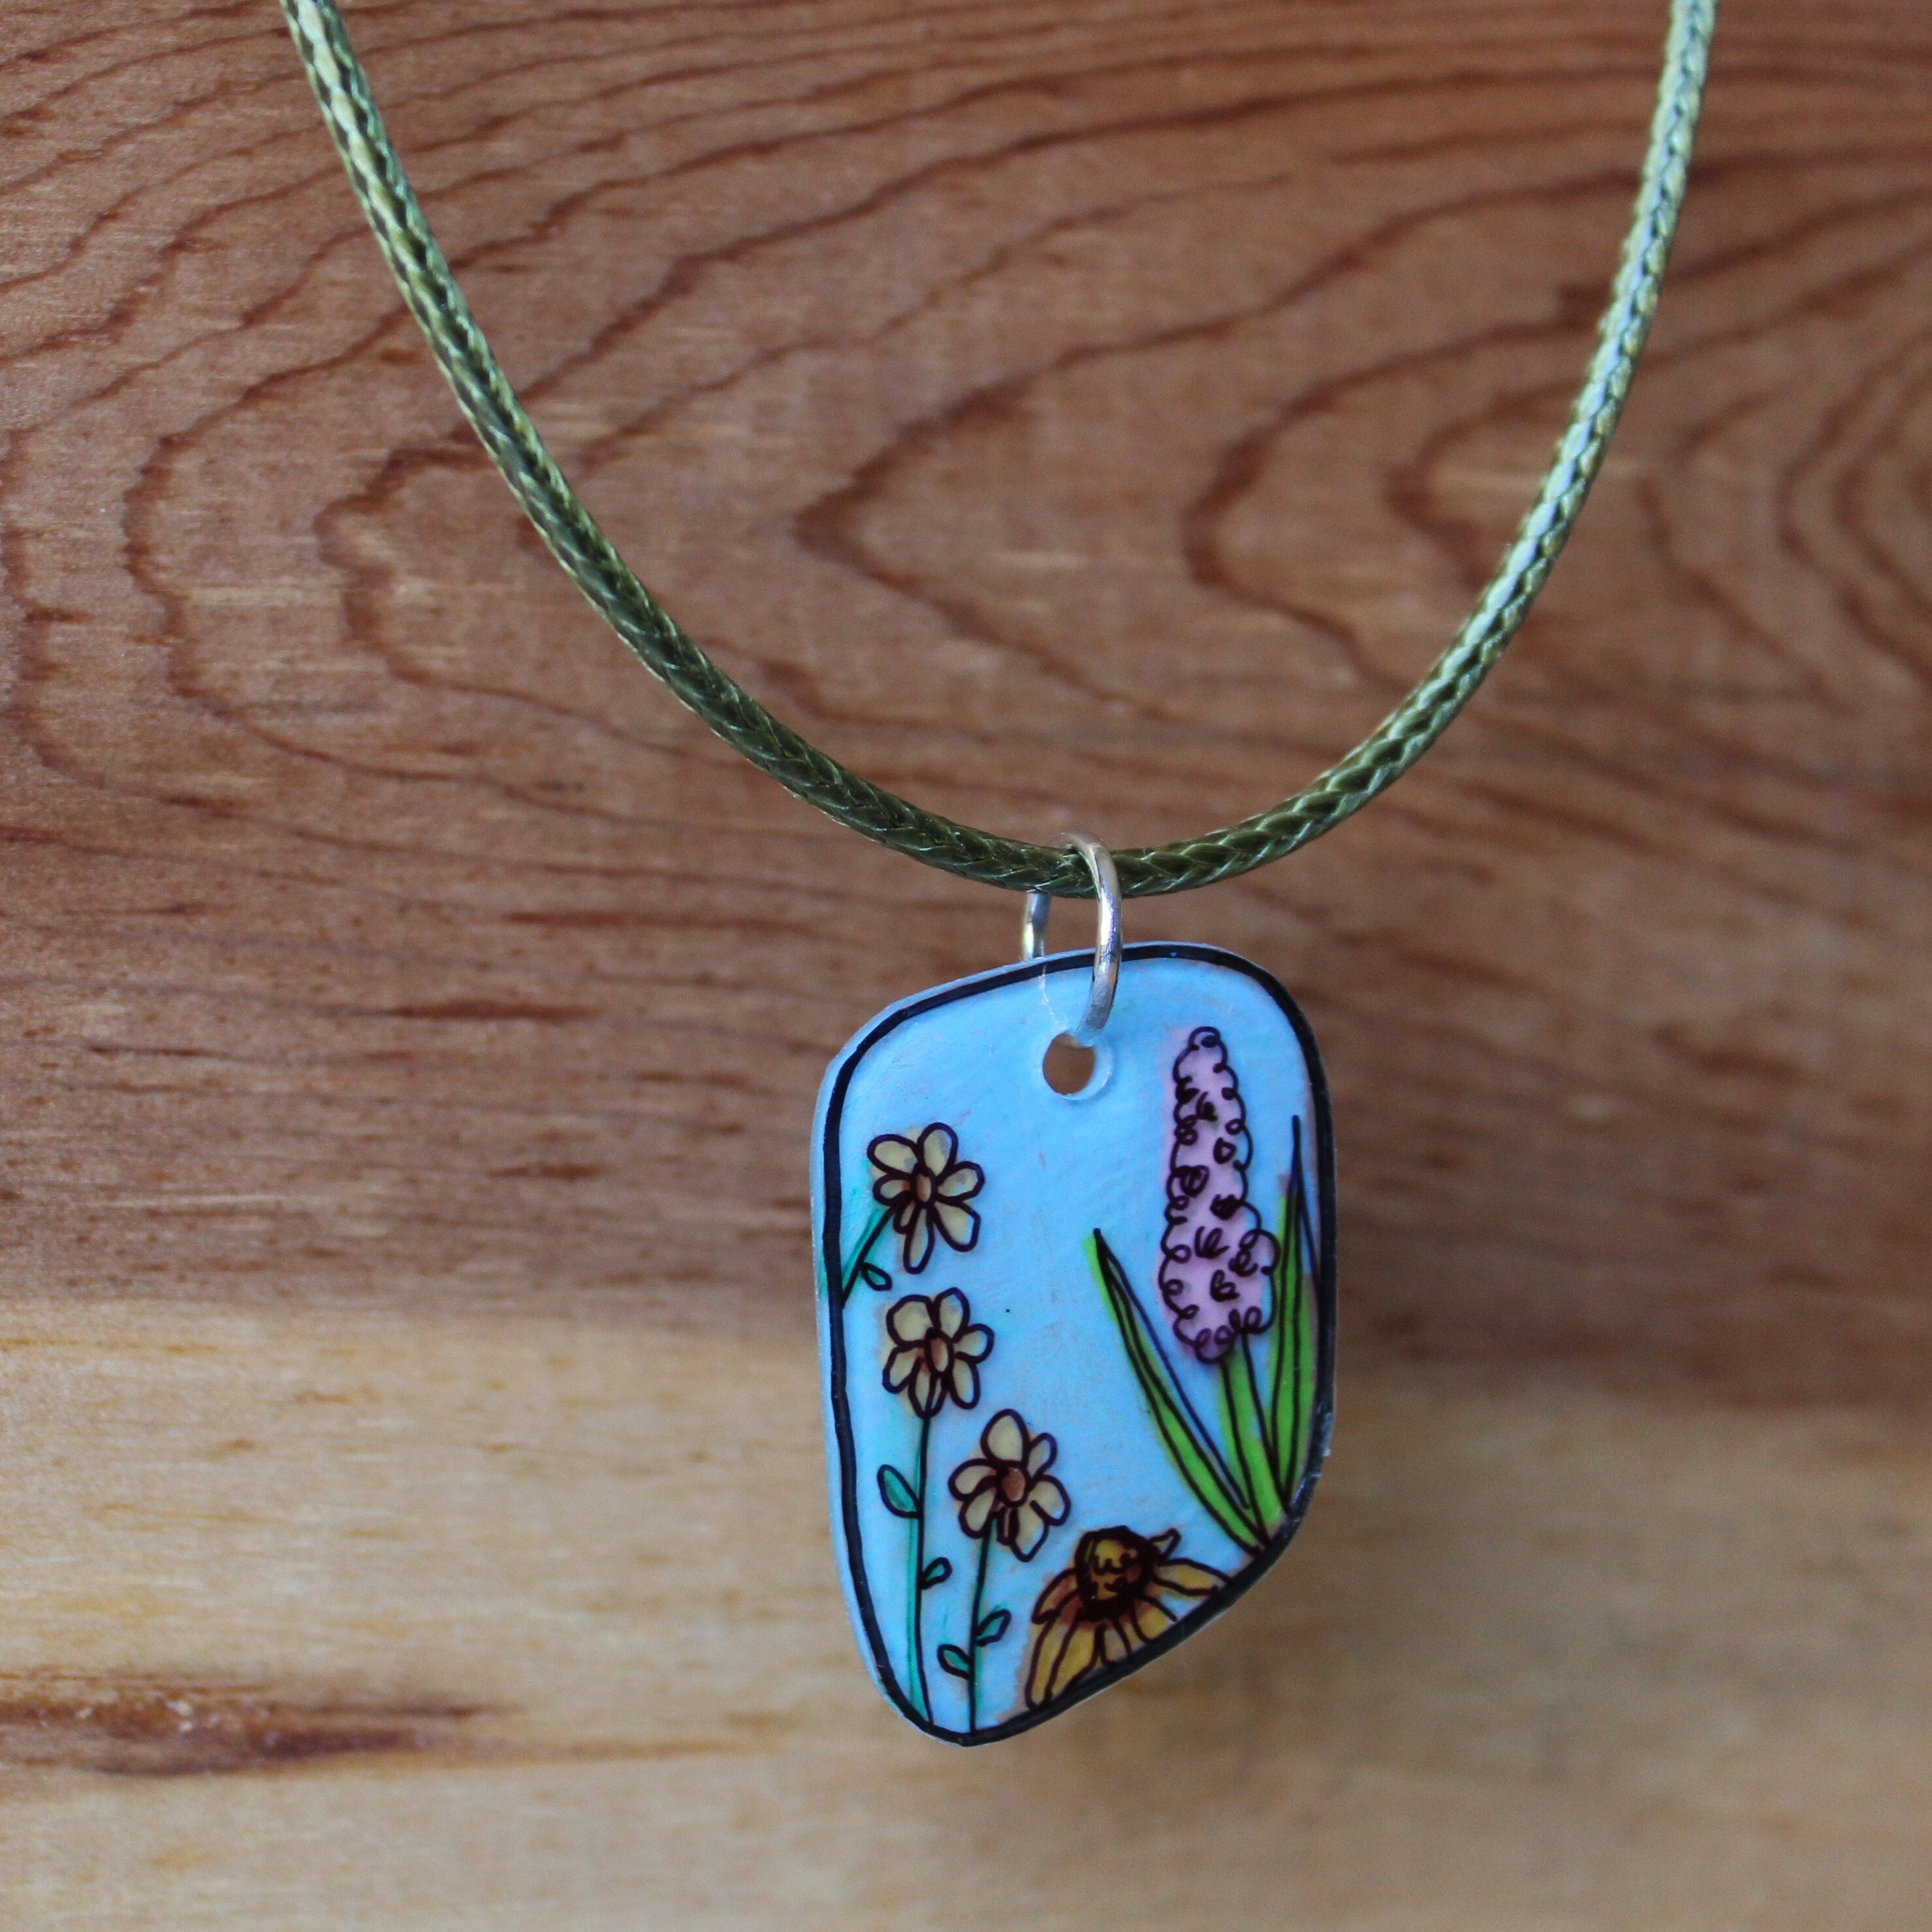 Shrinky dink necklace's, Gallery posted by Afrodite